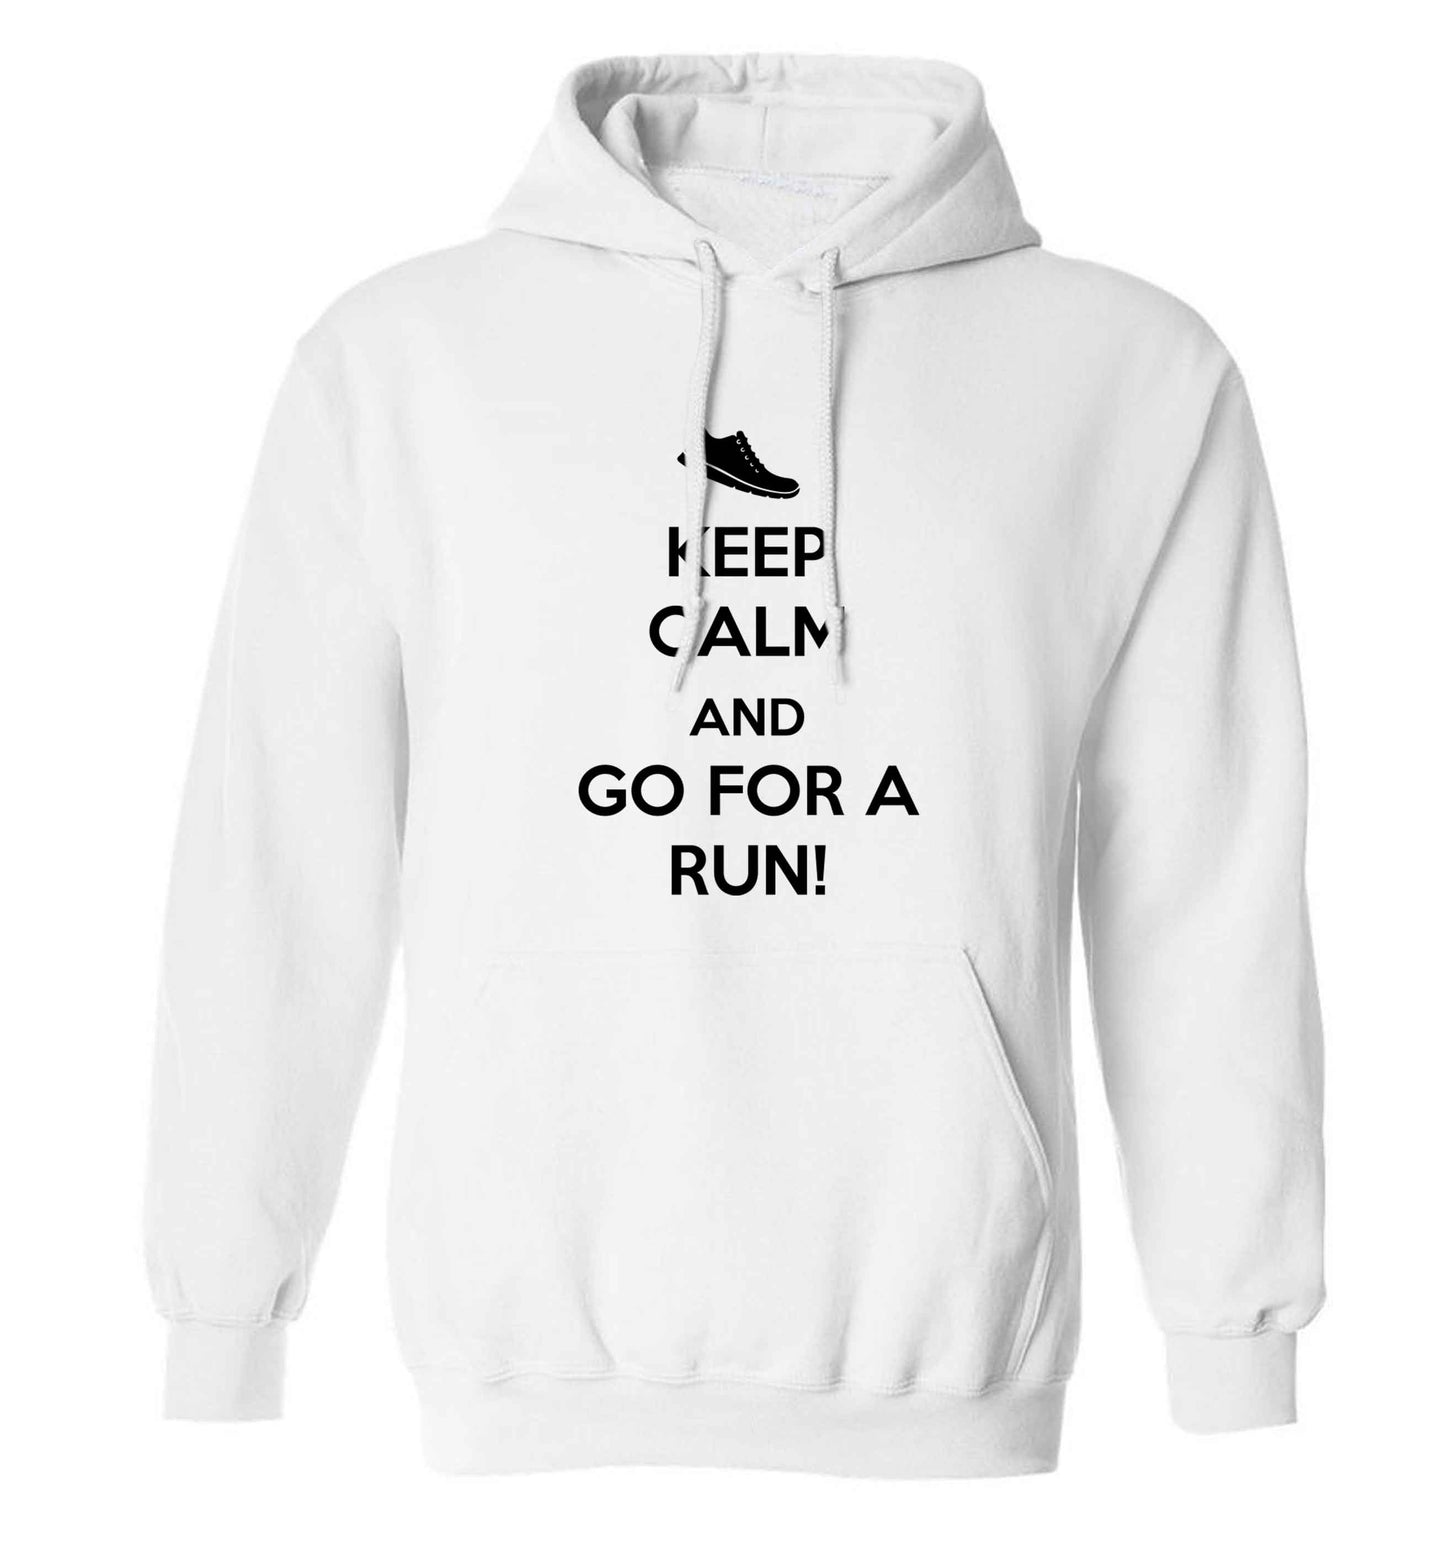 Keep calm and go for a run adults unisex white hoodie 2XL